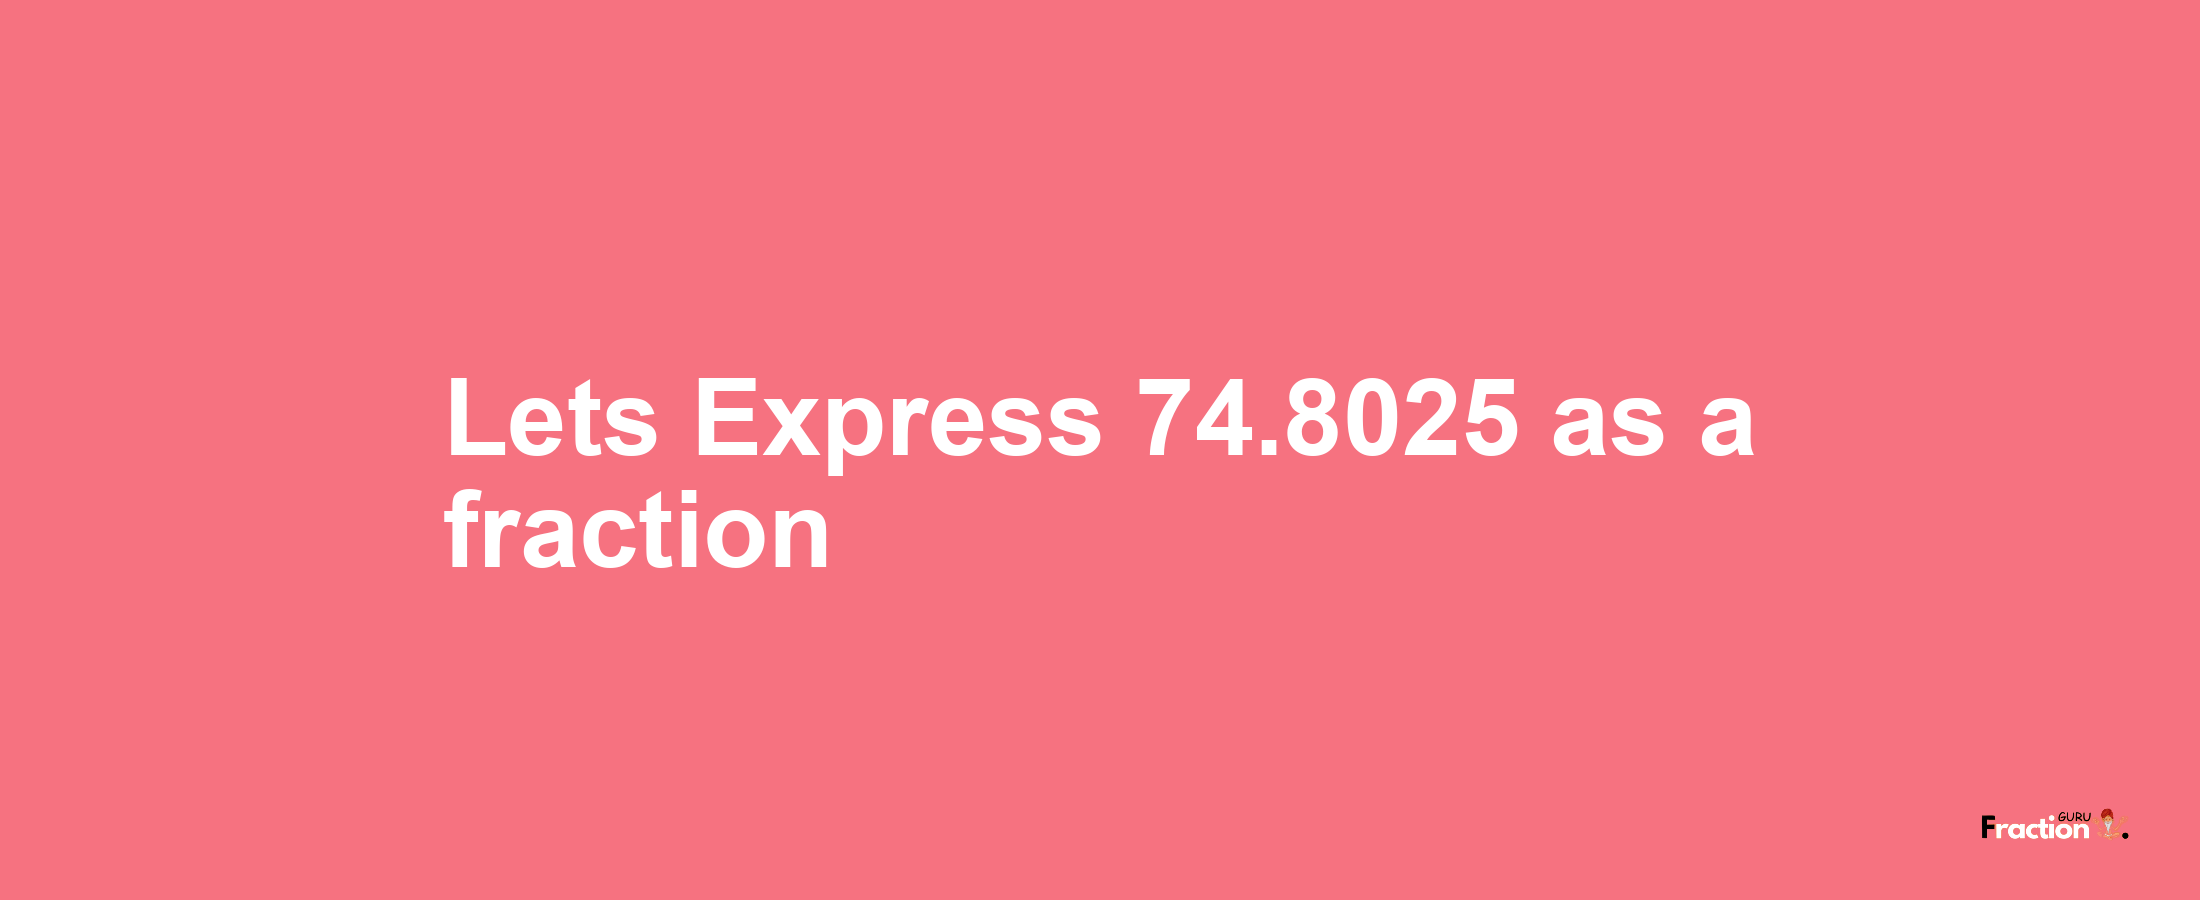 Lets Express 74.8025 as afraction